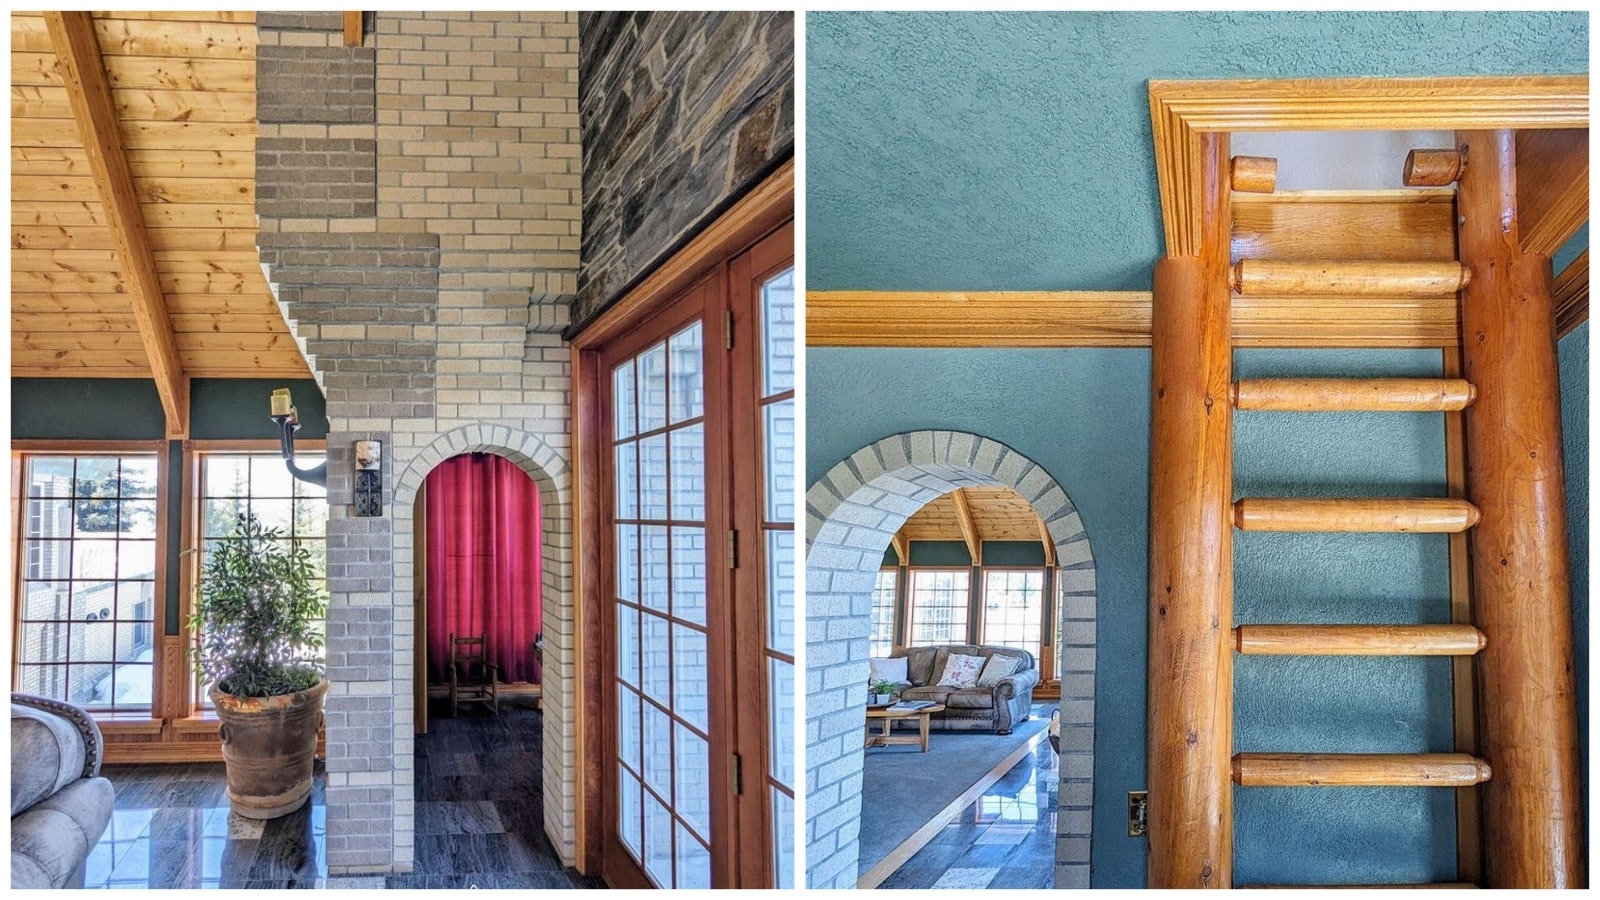 There's nothing ordinary about the Bedford Castle, with unique features throughout the 9,470-square-foot fairy tale castle.